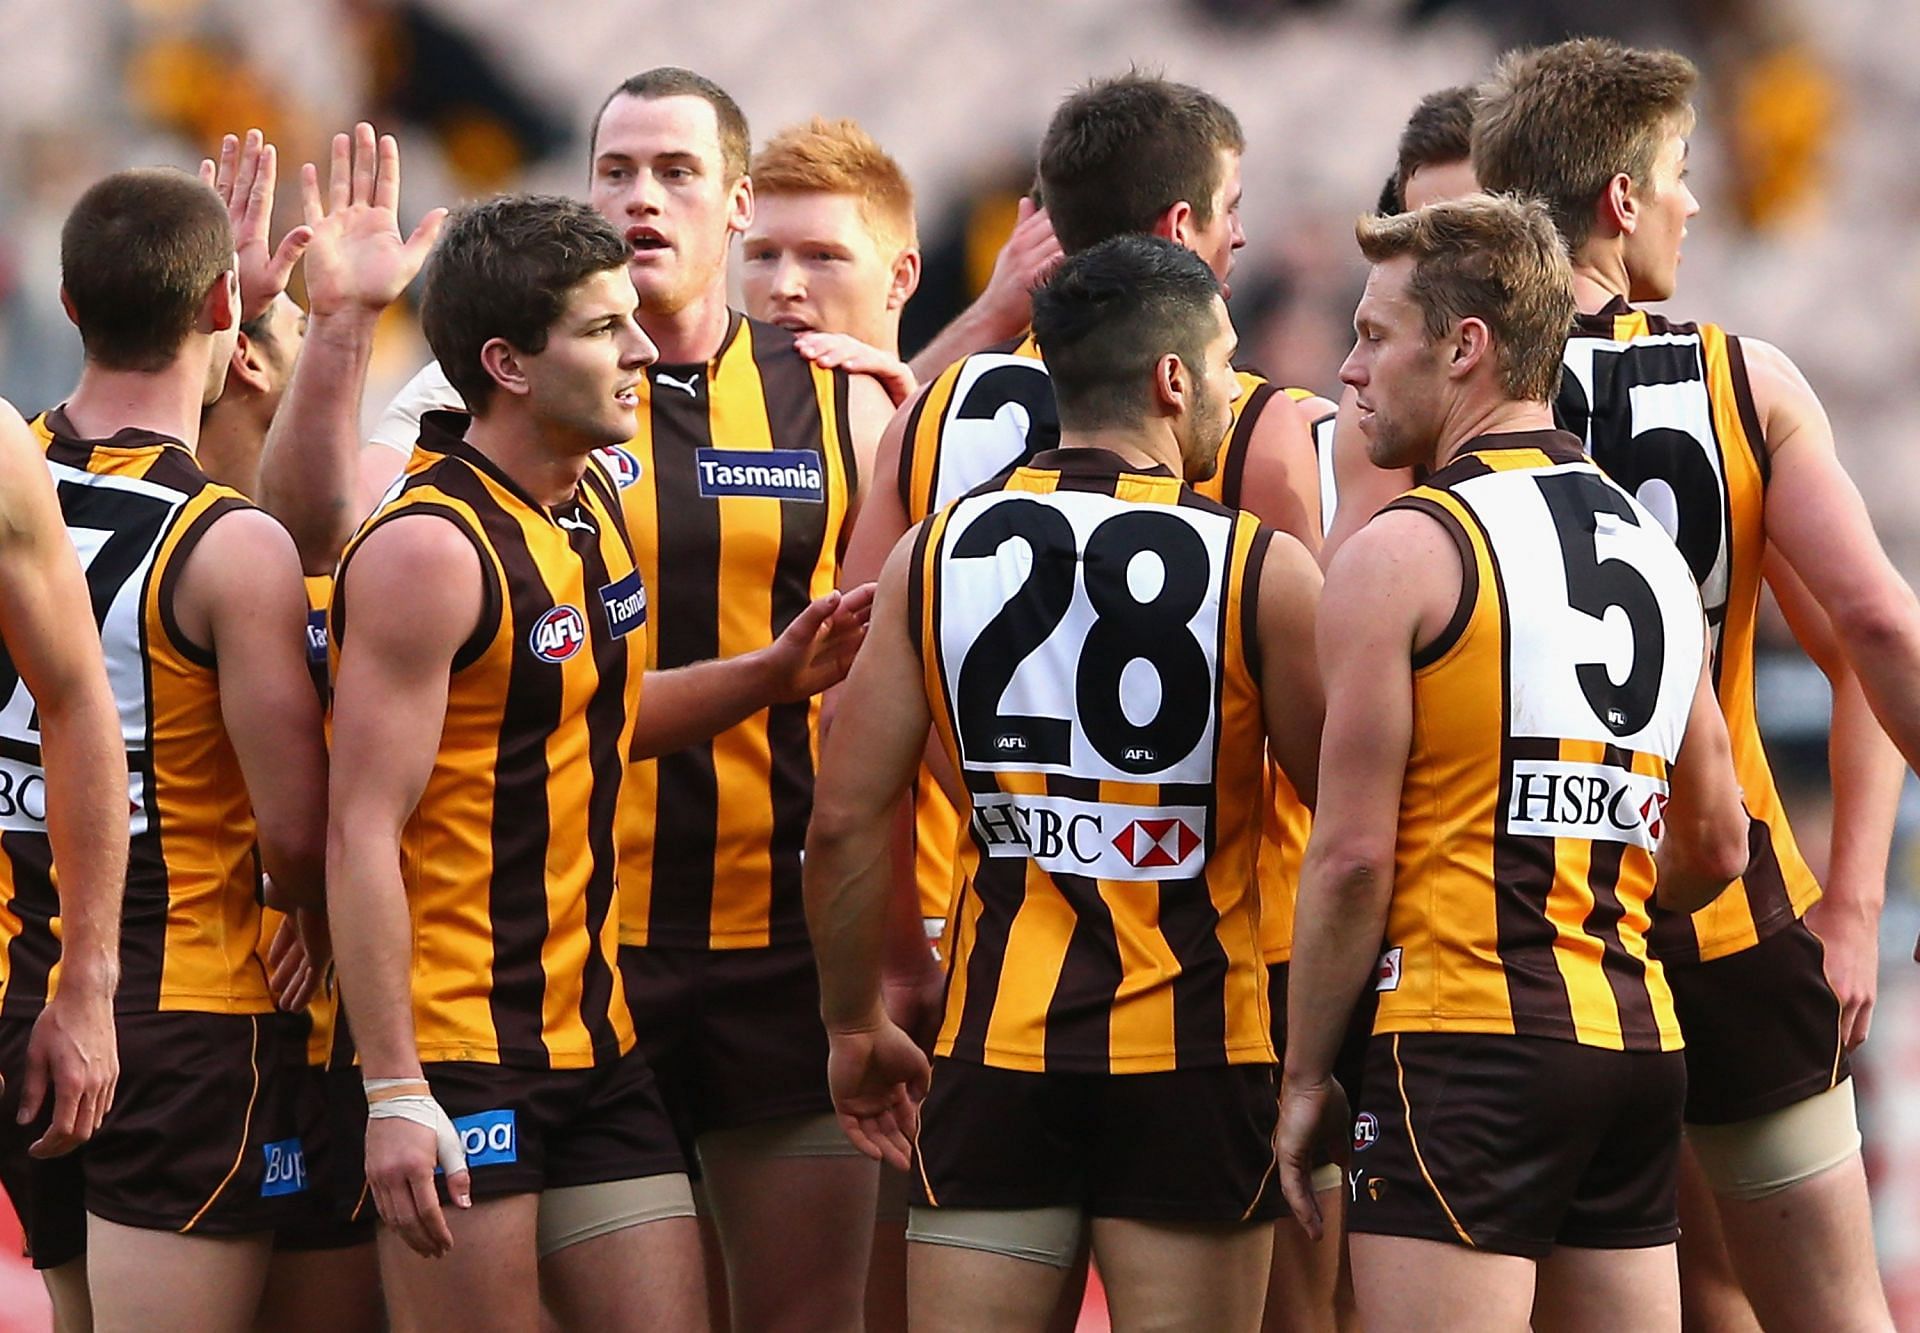 Hawthorn have some of the biggest winning margins in AFL history